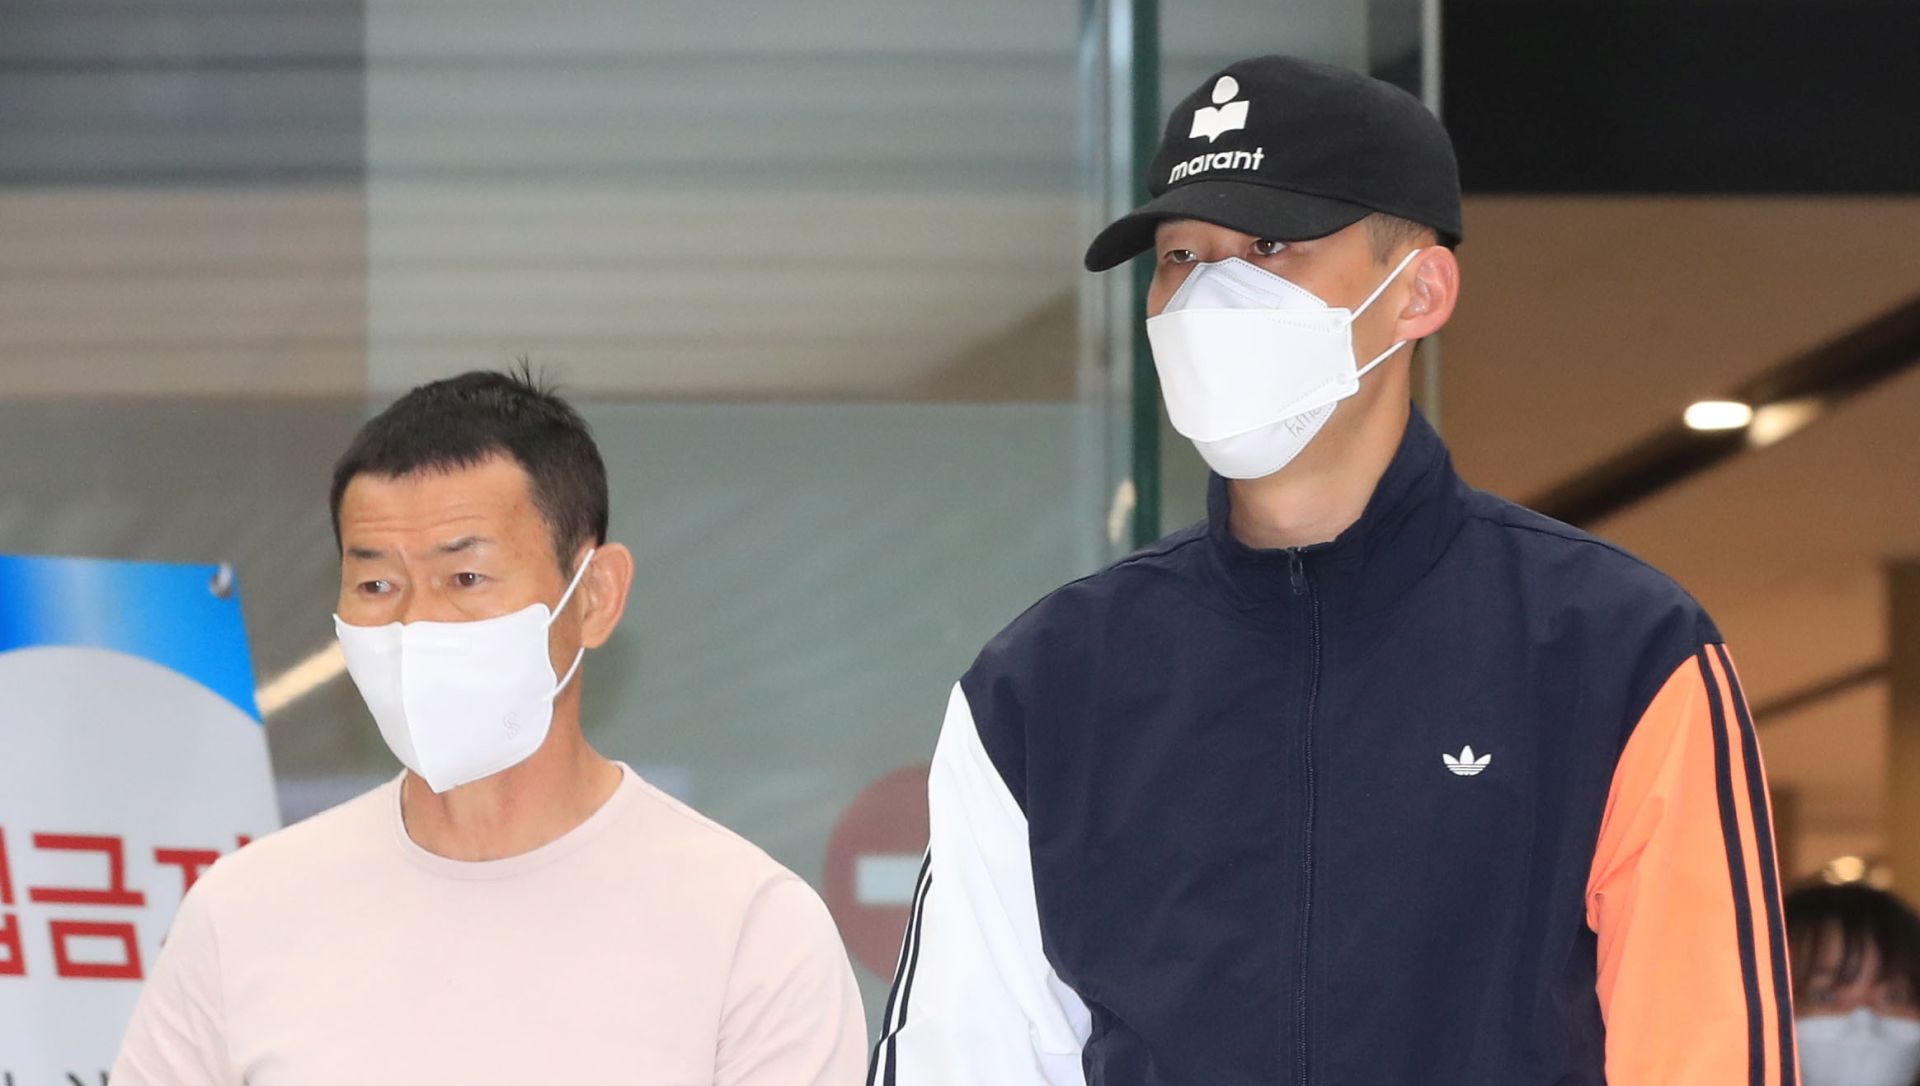 epa08409046 Tottenham Hotspur forward Son Heung-min (R) and his father (L) leave Gimpo International Airport, west of Seoul, South Korea, 08 May 2020. Son completed his three-week military training at a boot camp on Jeju island as part of his minimum military duty earlier in the day as he was exempted from the country's obligatory 18-month military service by winning the gold medal in the 2018 Asian Games.  EPA/YONHAP SOUTH KOREA OUT